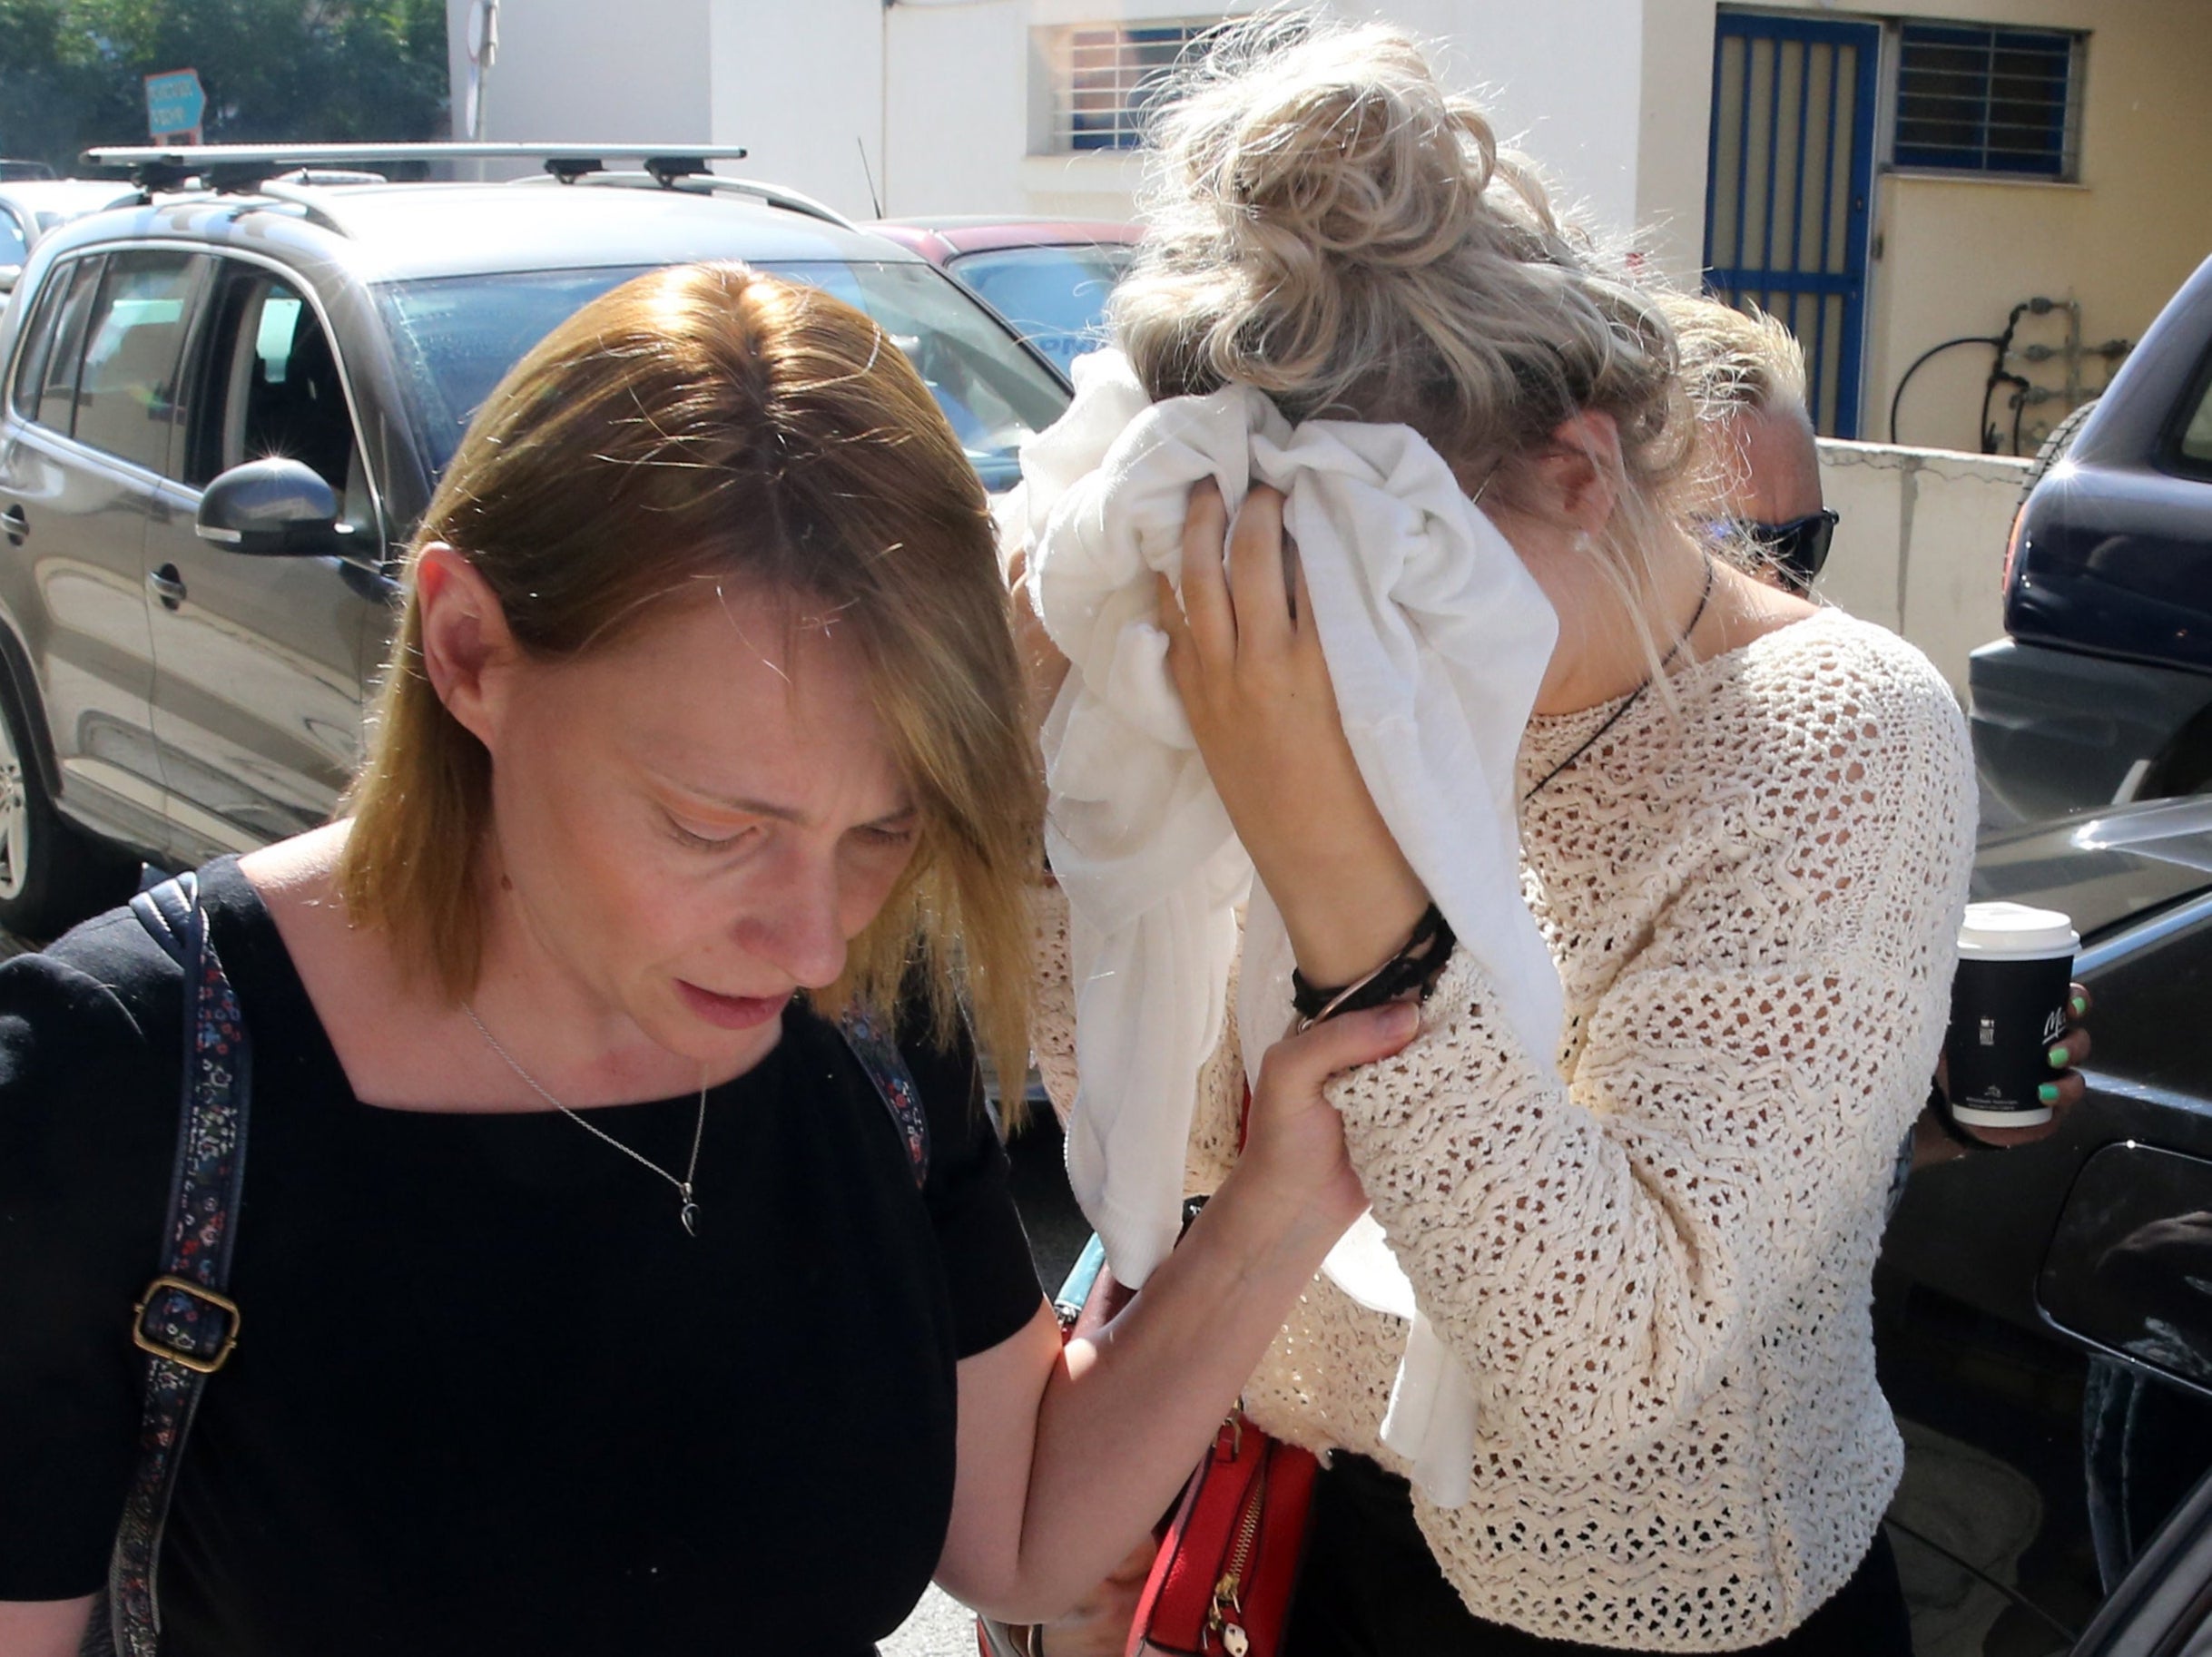 A British woman convicted of lying about being gang-raped in Cyprus has filed an appeal to the island’s Supreme Court in a bid to clear her name